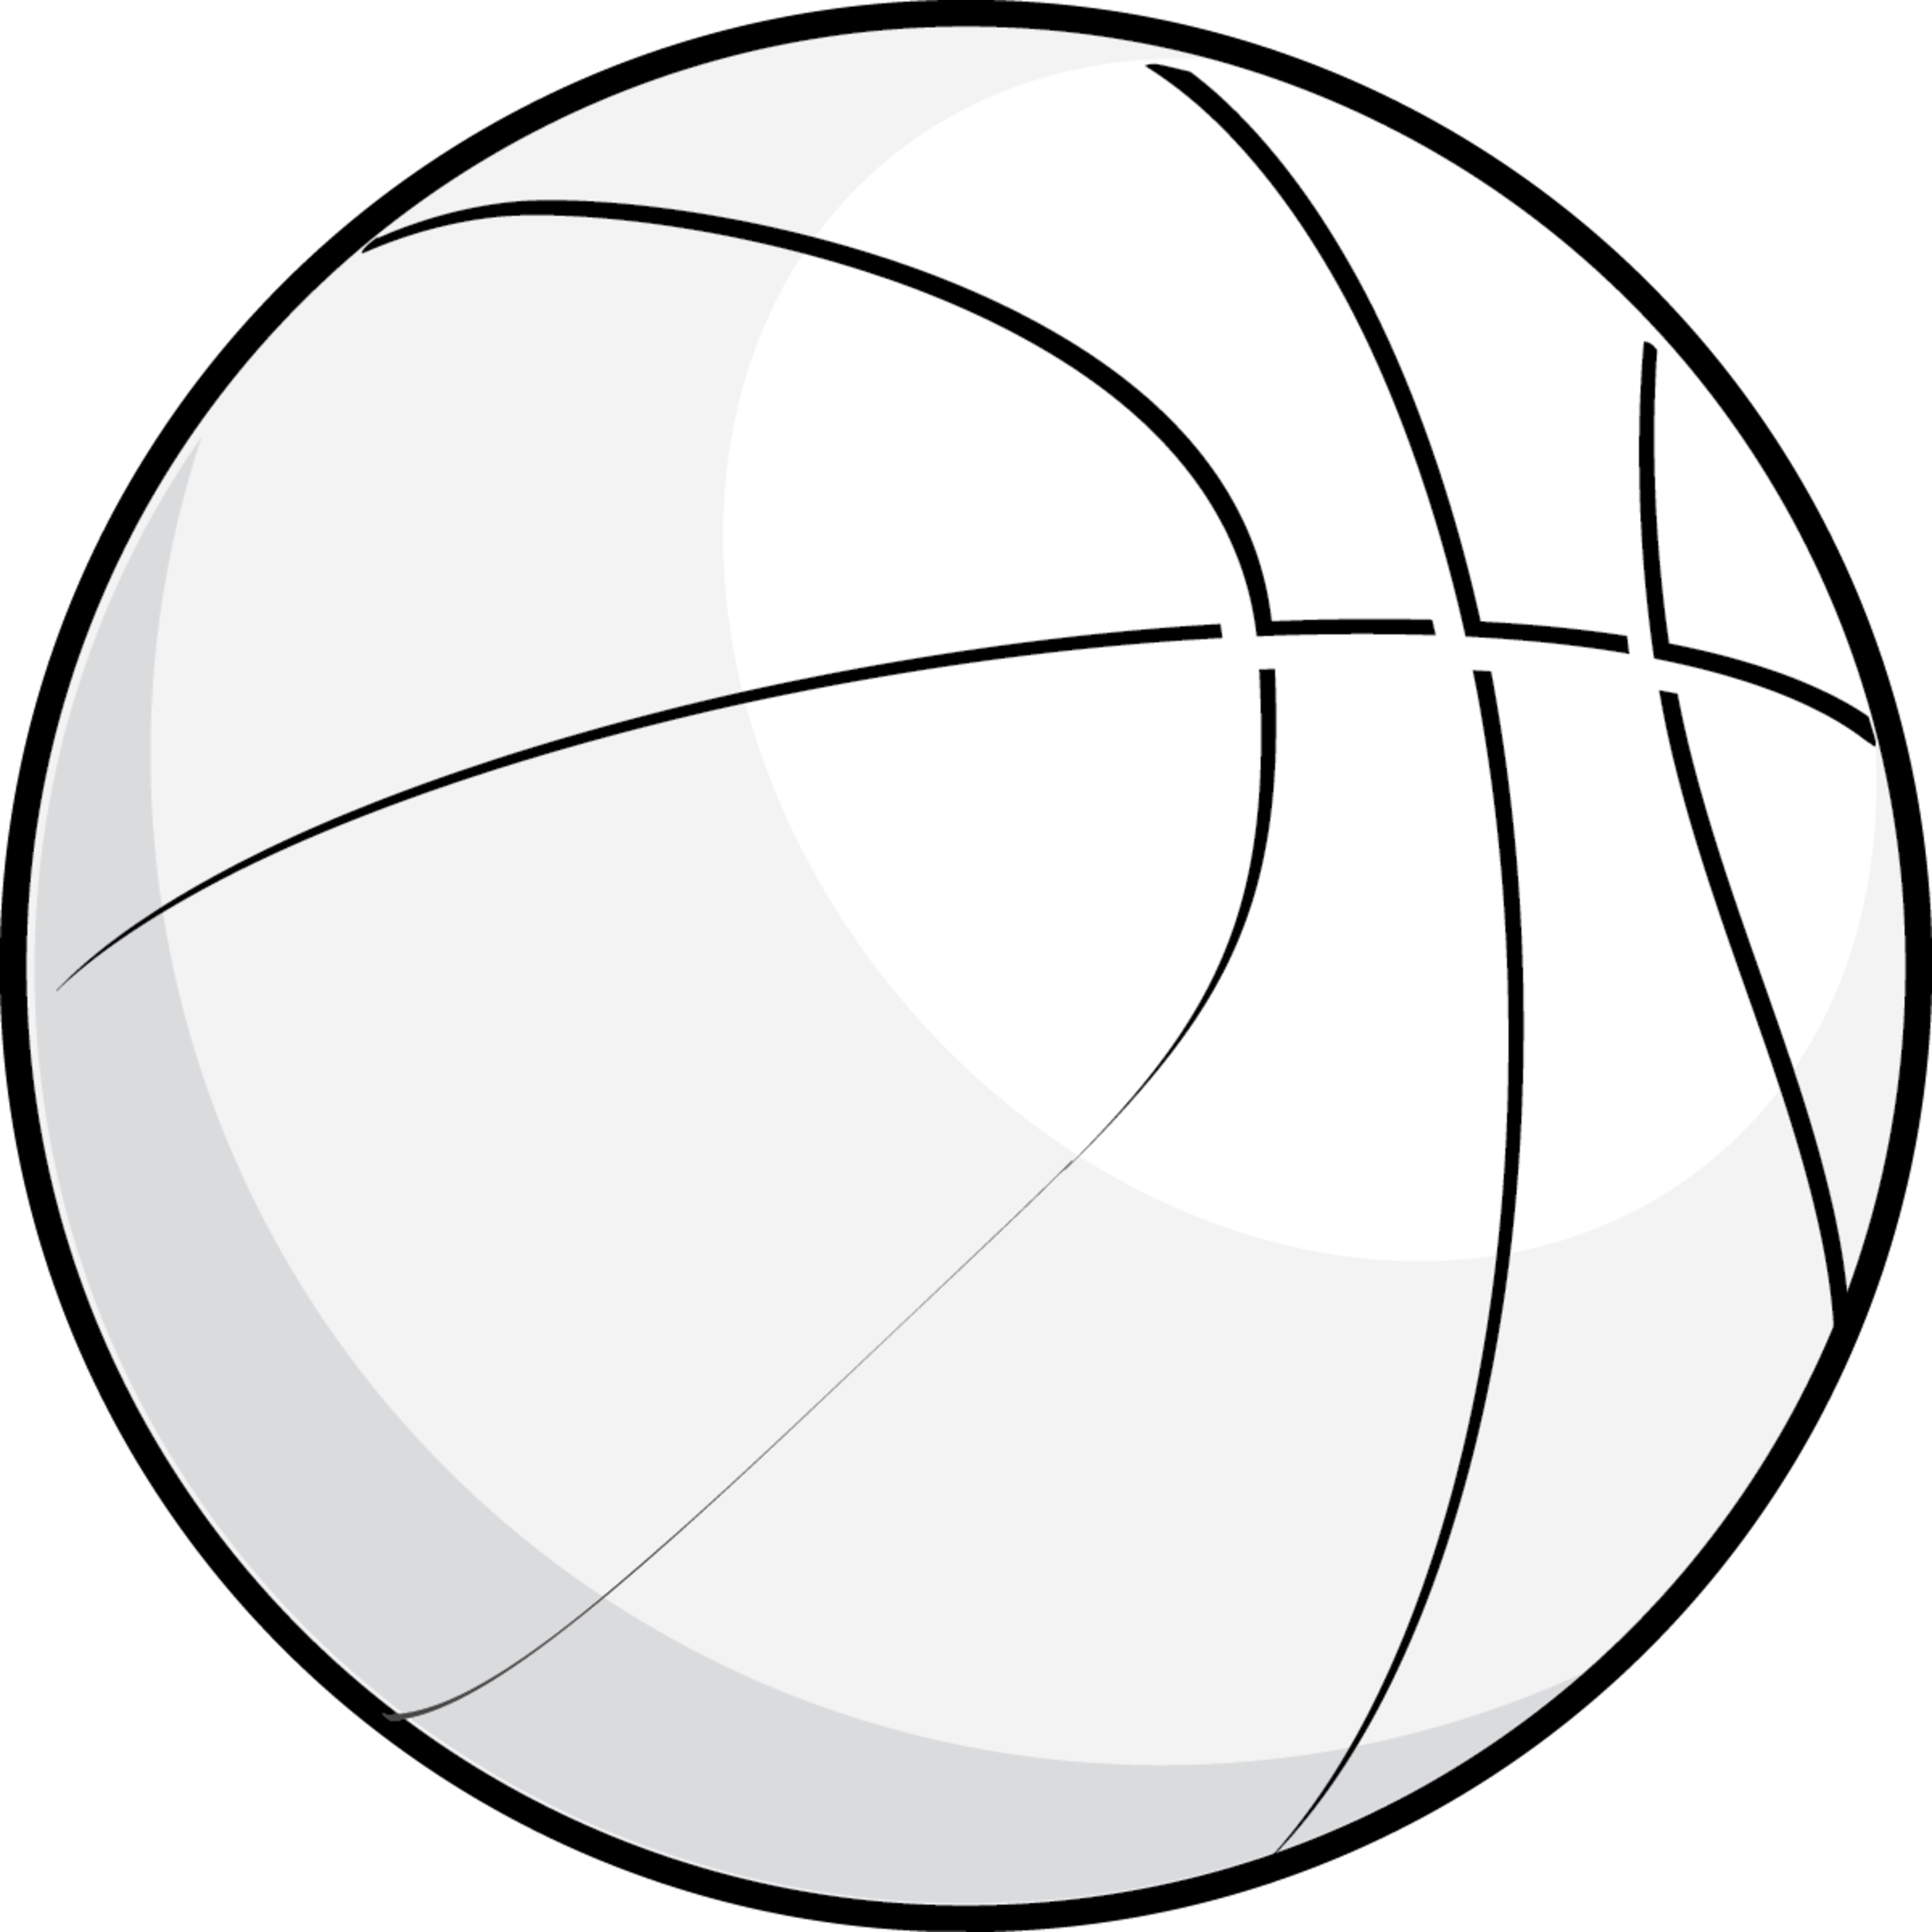 Basketball  black and white house clipart black and white 6